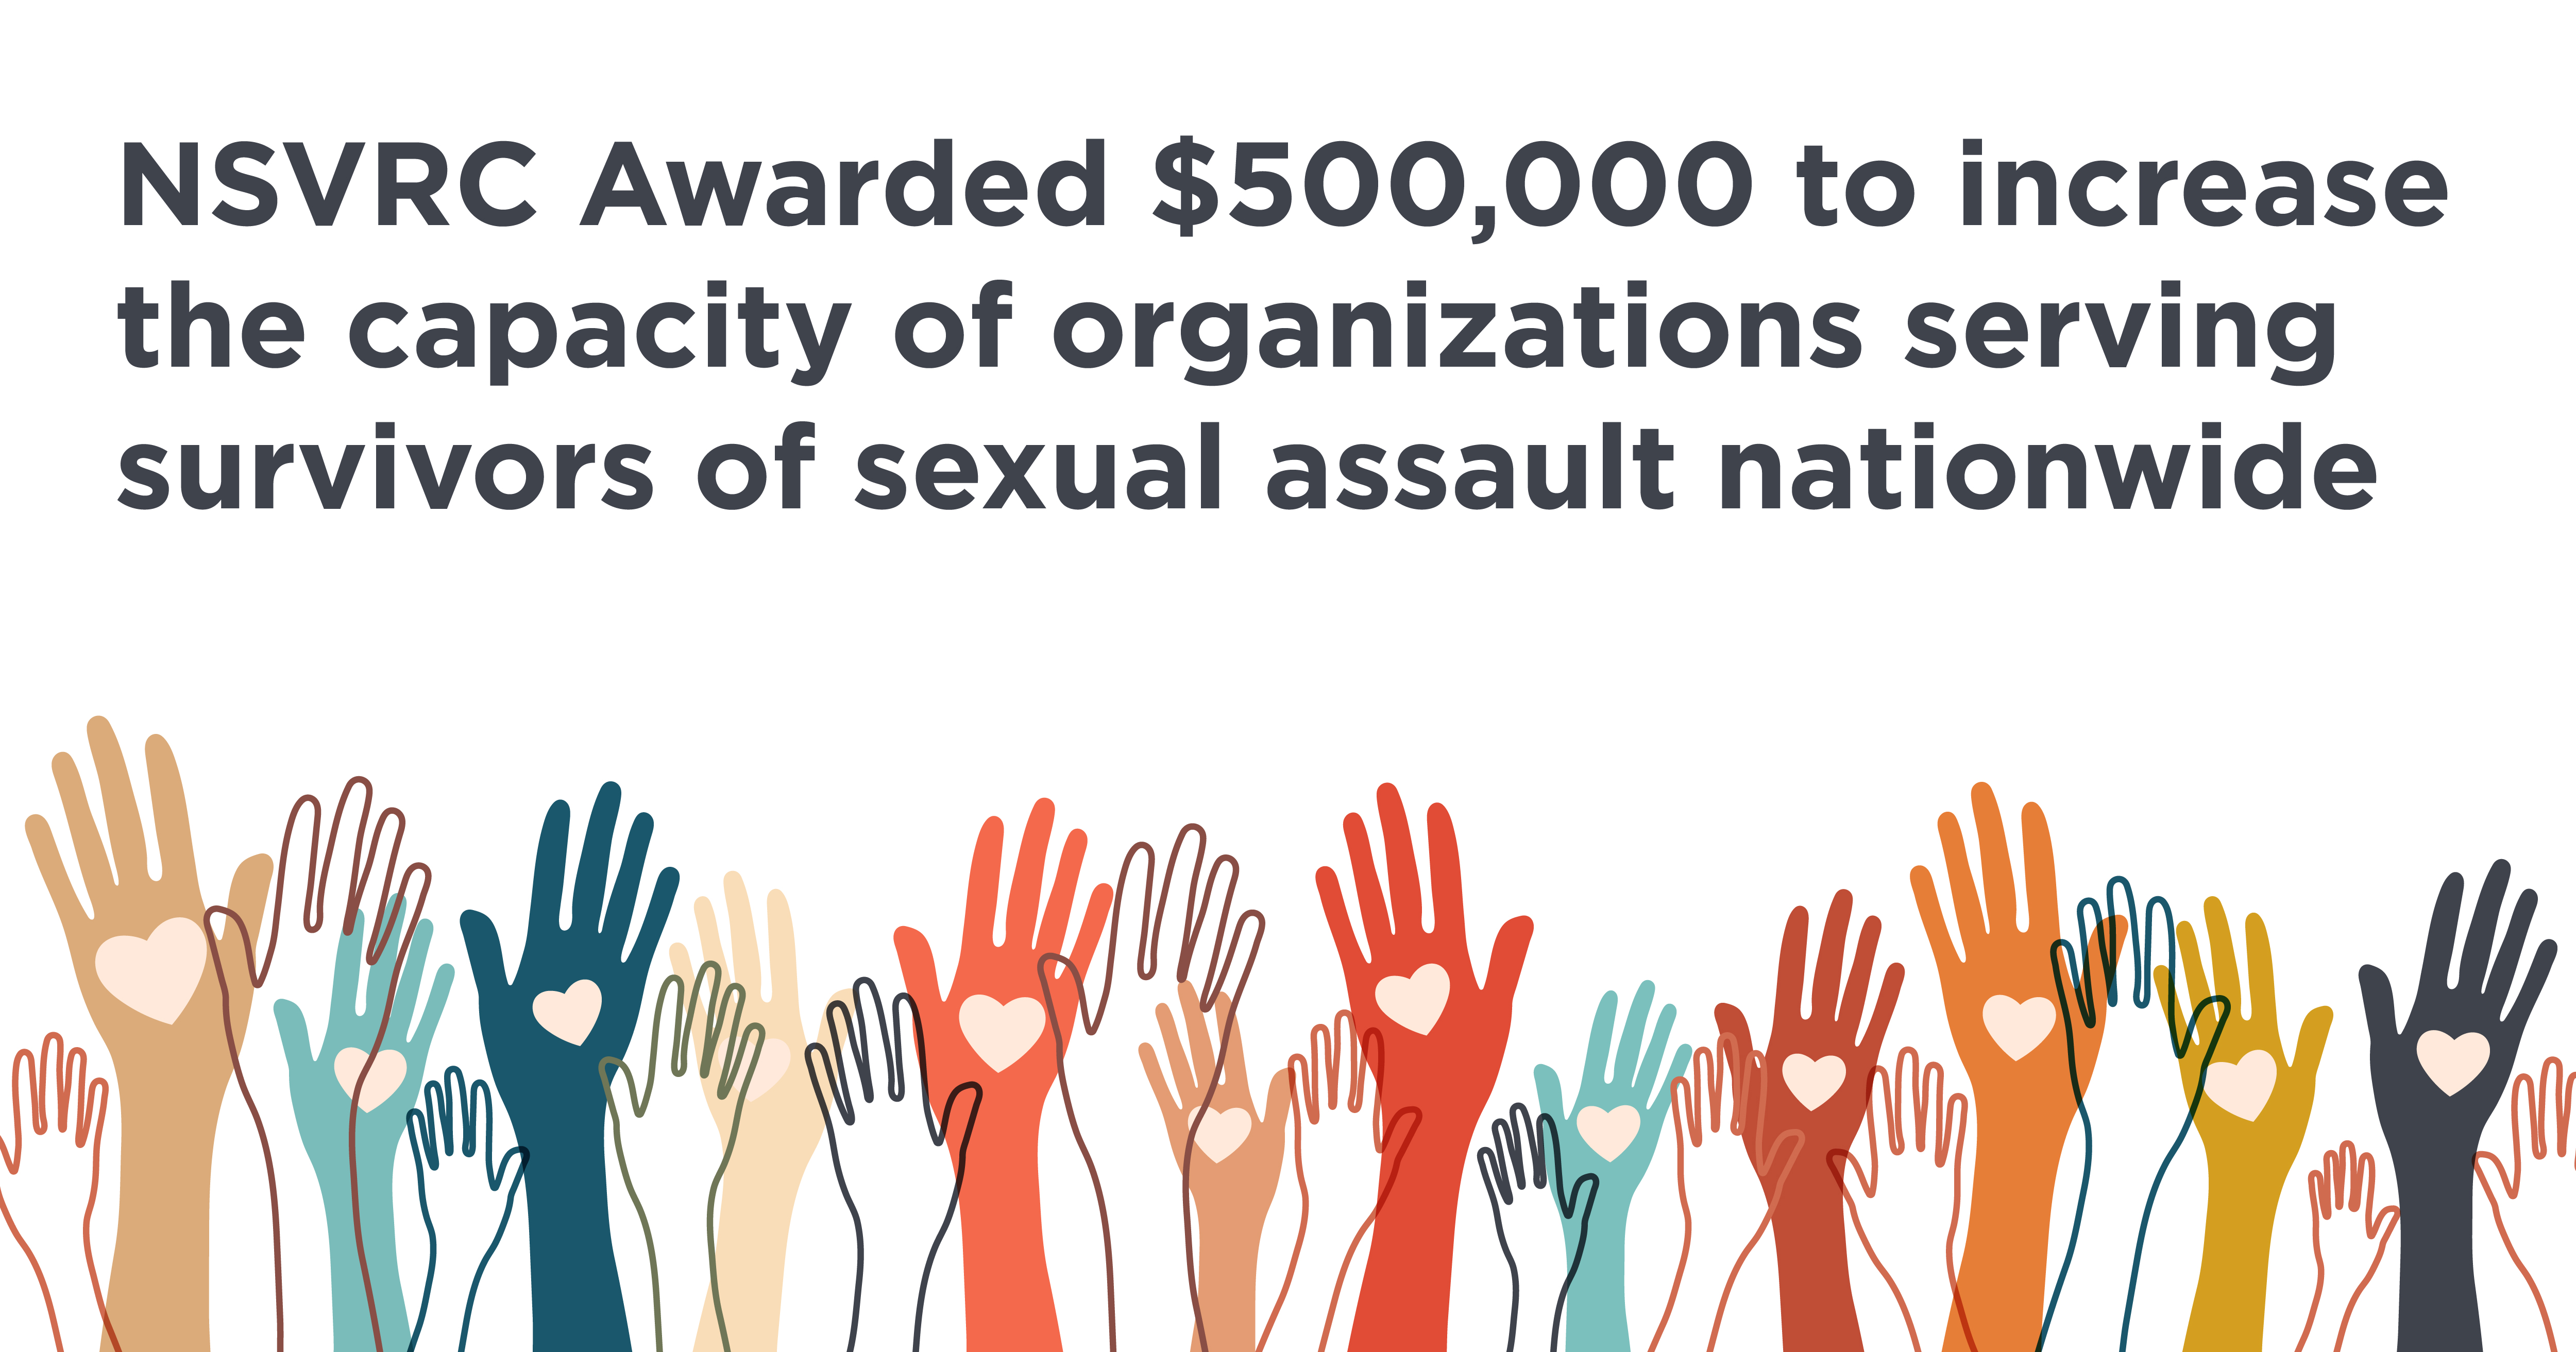 NSVRC Awarded $500,000 to increase the capacity of organizations serving survivors of sexual assault nationwide 